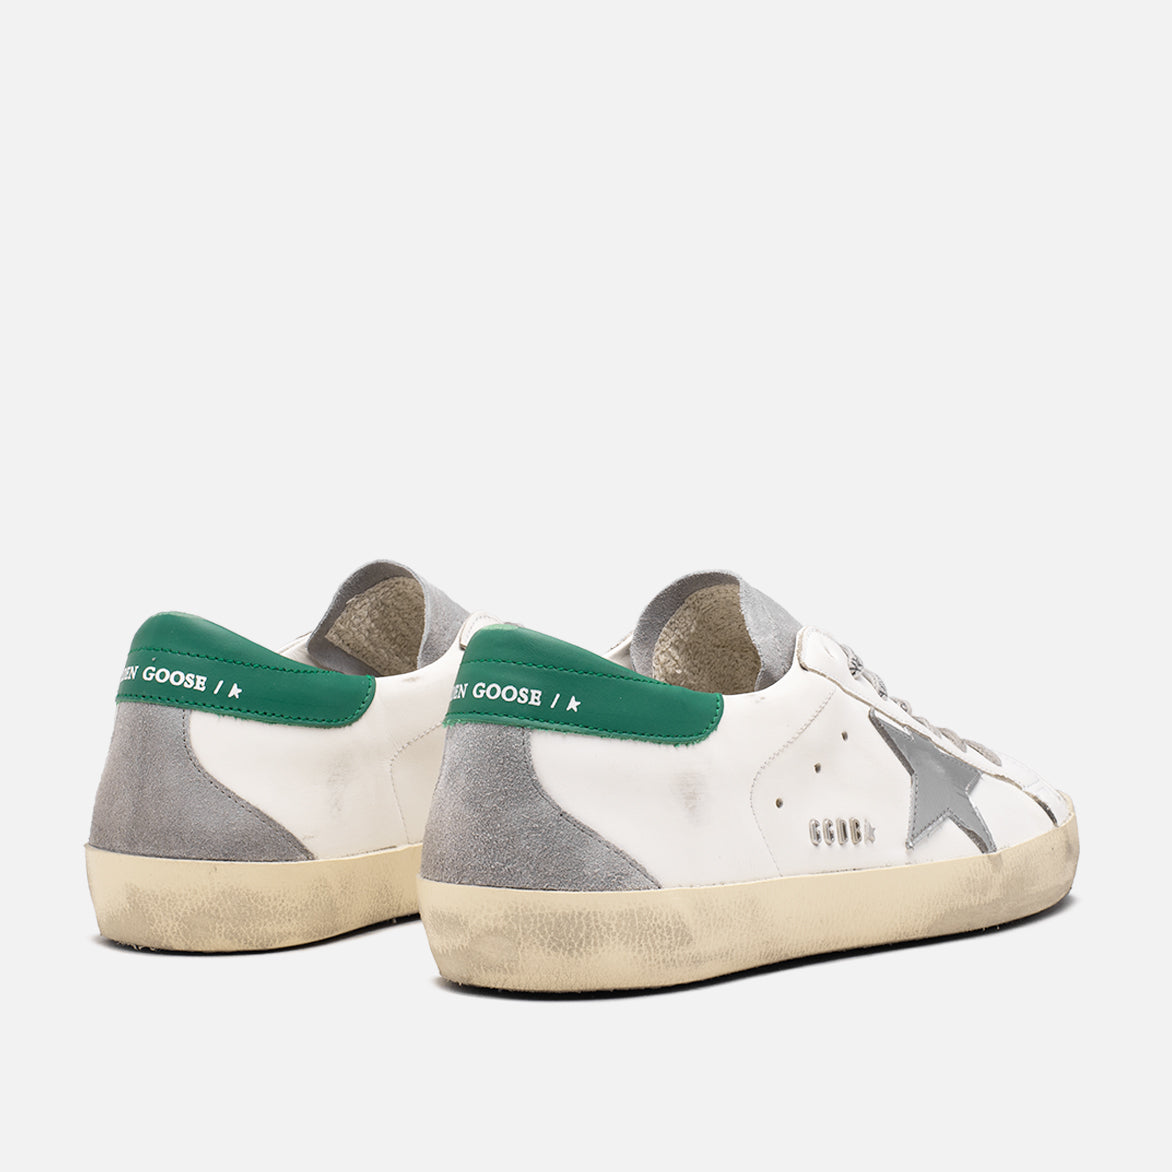 SUPERSTAR CLASSIC LEATHER - WHITE / GREY / SILVER / GREEN